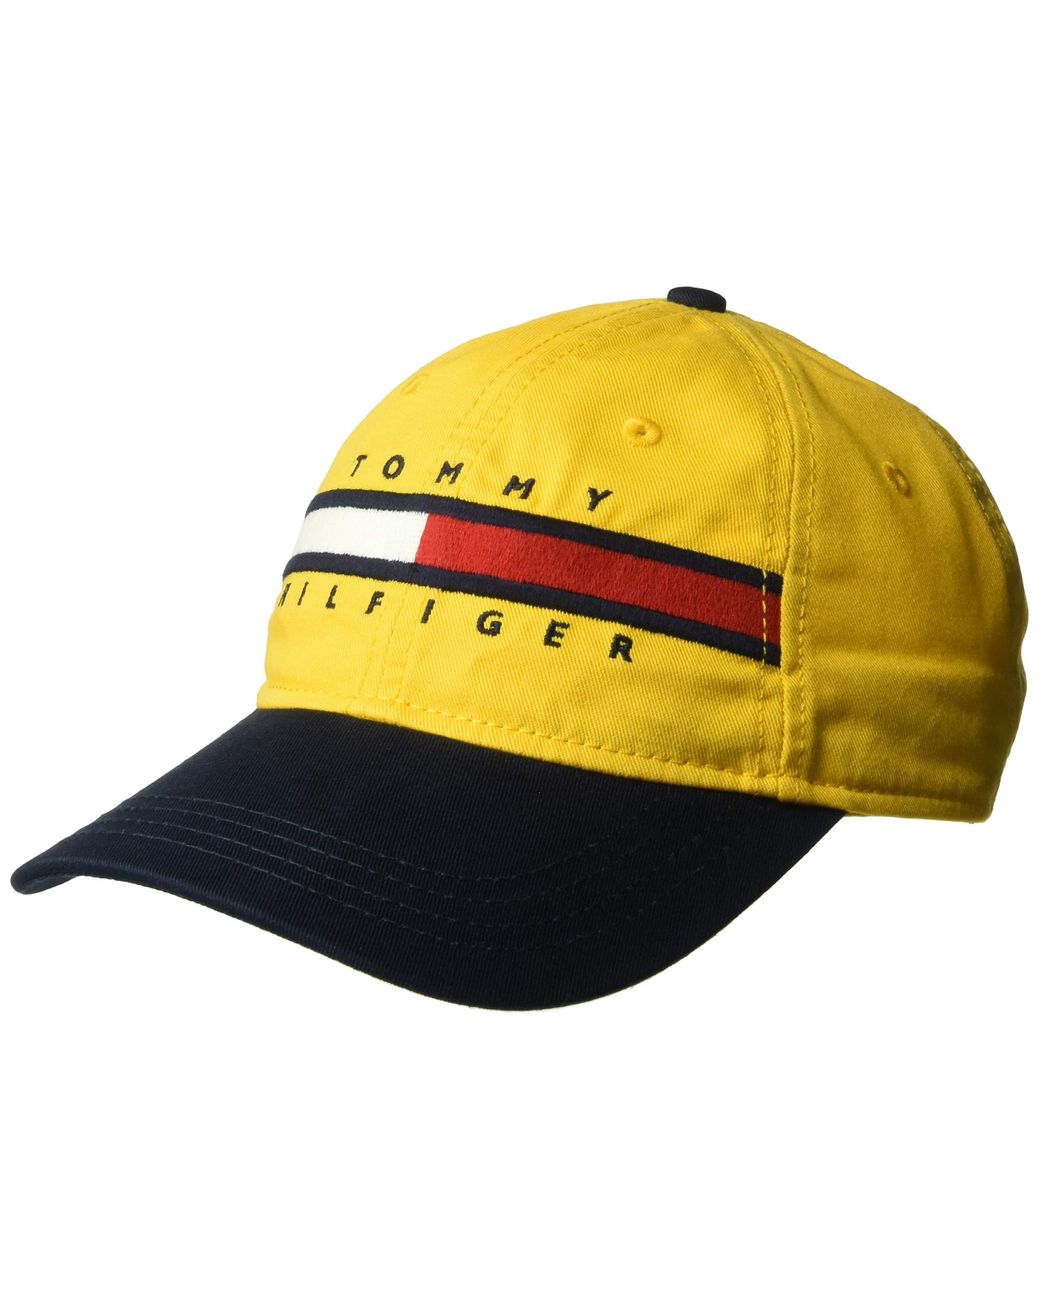 Tommy Hilfiger Dad Hat Avery in Yellow for Men - Lyst